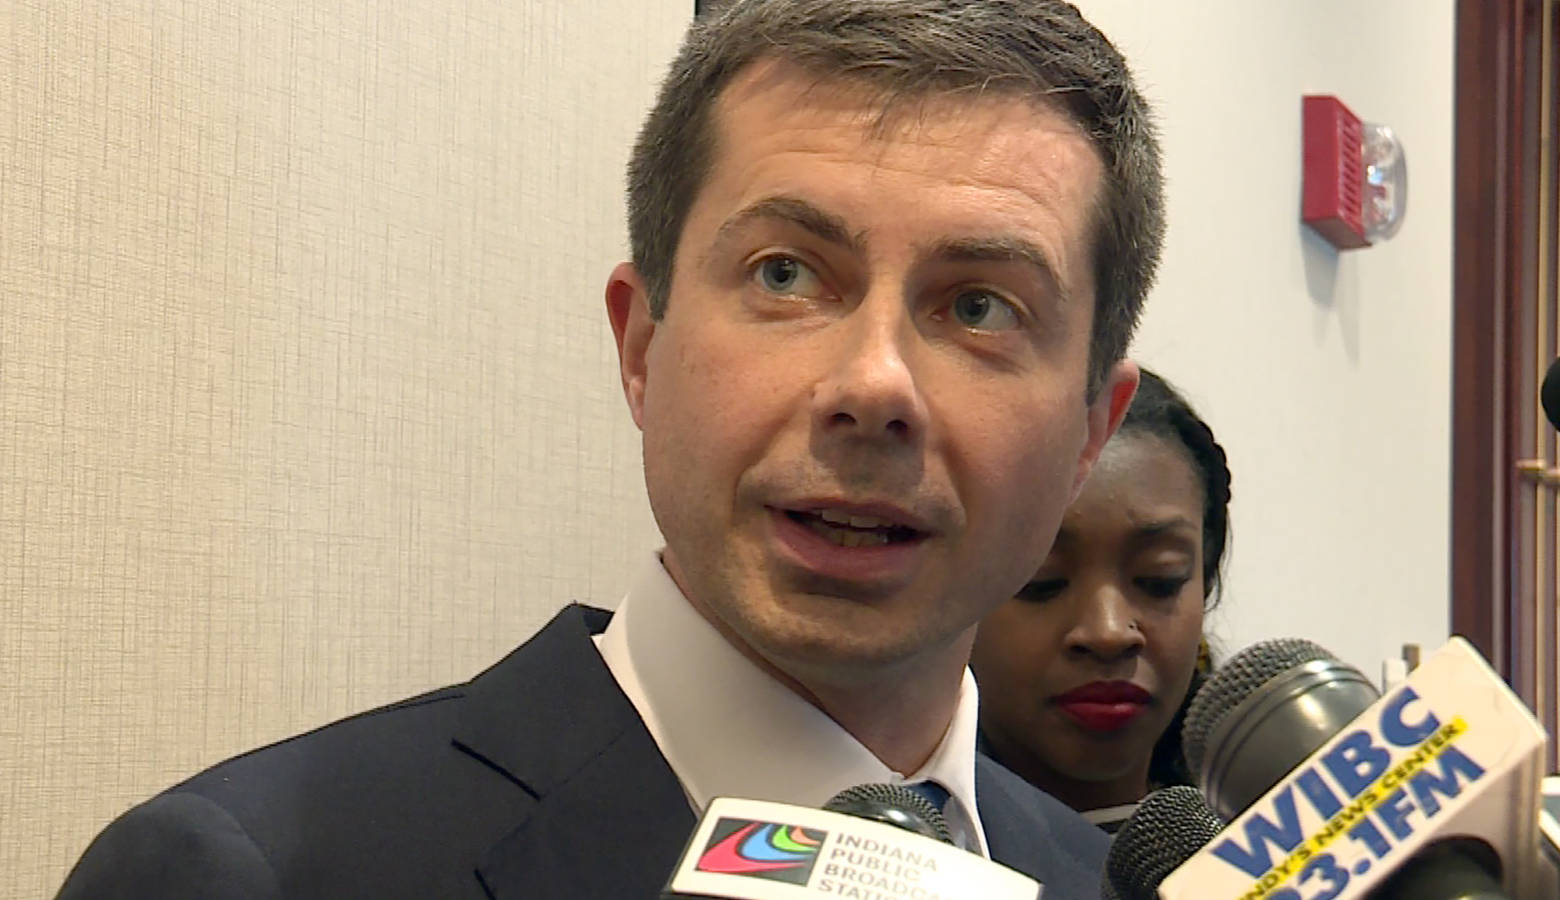 Mayor Pete Buttigieg (D-South Bend) speaks to reporters prior to his speech at an Indianapolis NAACP event. (Lauren Chapman/IPB News)